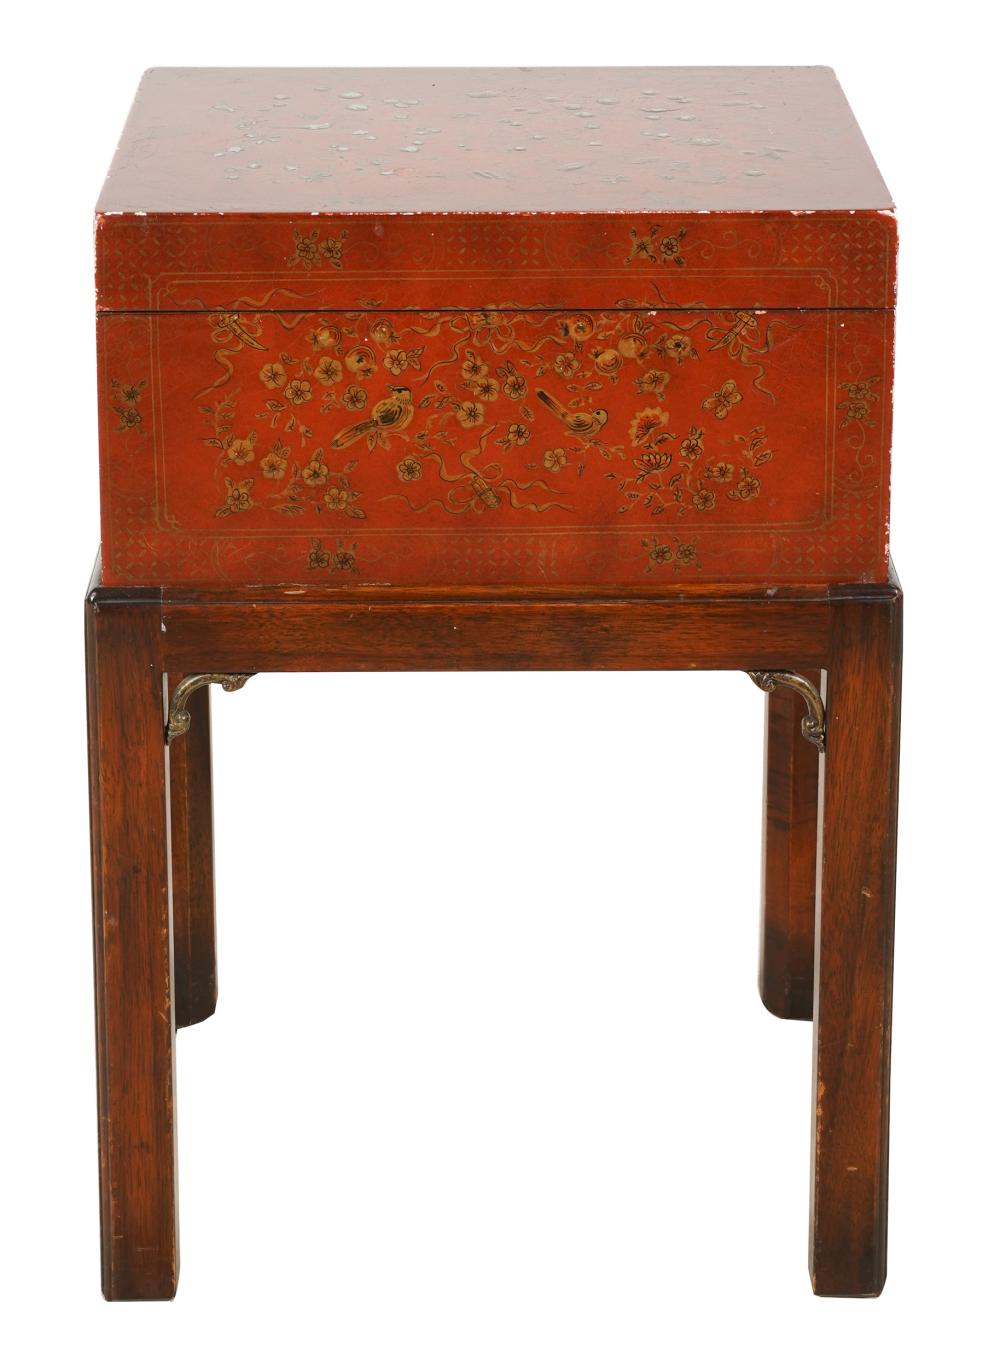 CHINESE-STYLE LACQUERED MAHOGANY